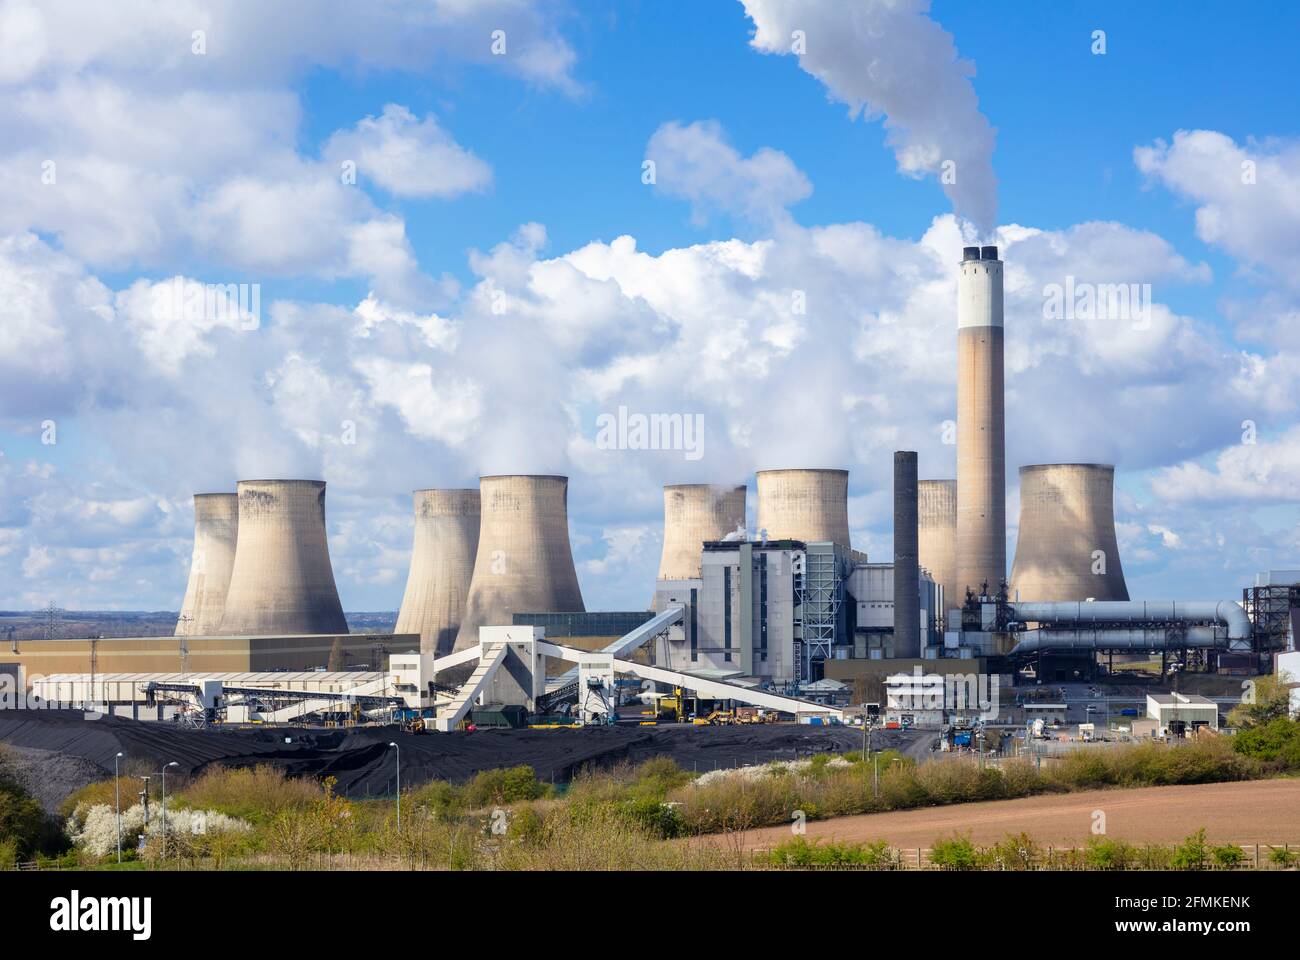 Ratcliffe-on-Soar power station with steam from the coal-fired power station cooling towers Ratcliffe on soar Nottinghamshire England UK GB Europe Stock Photo